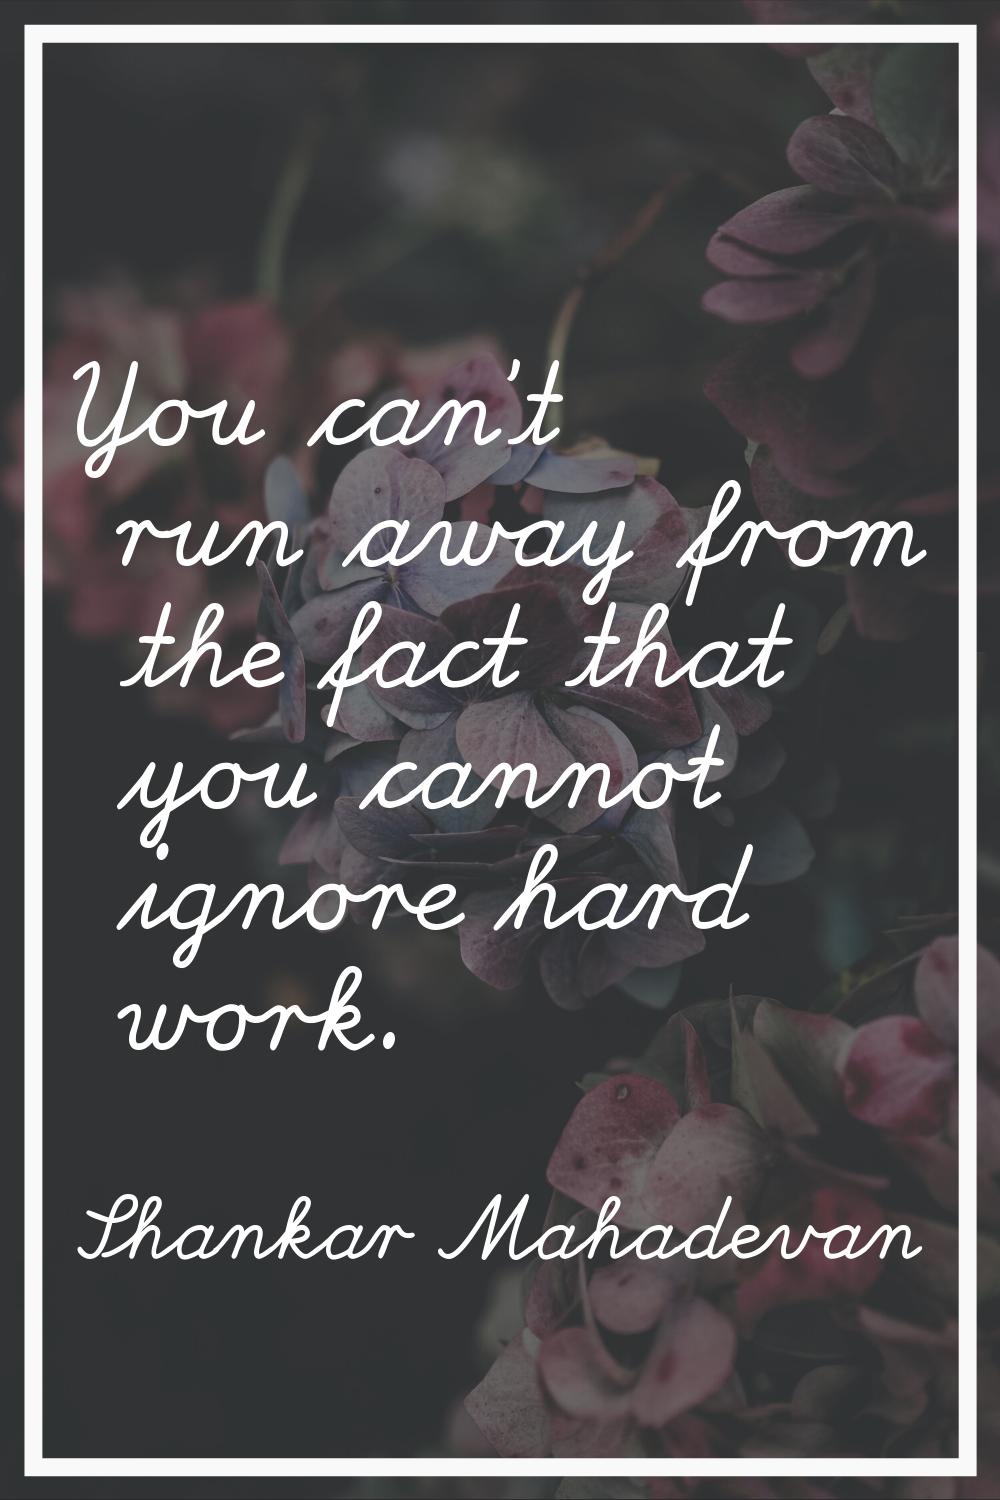 You can't run away from the fact that you cannot ignore hard work.